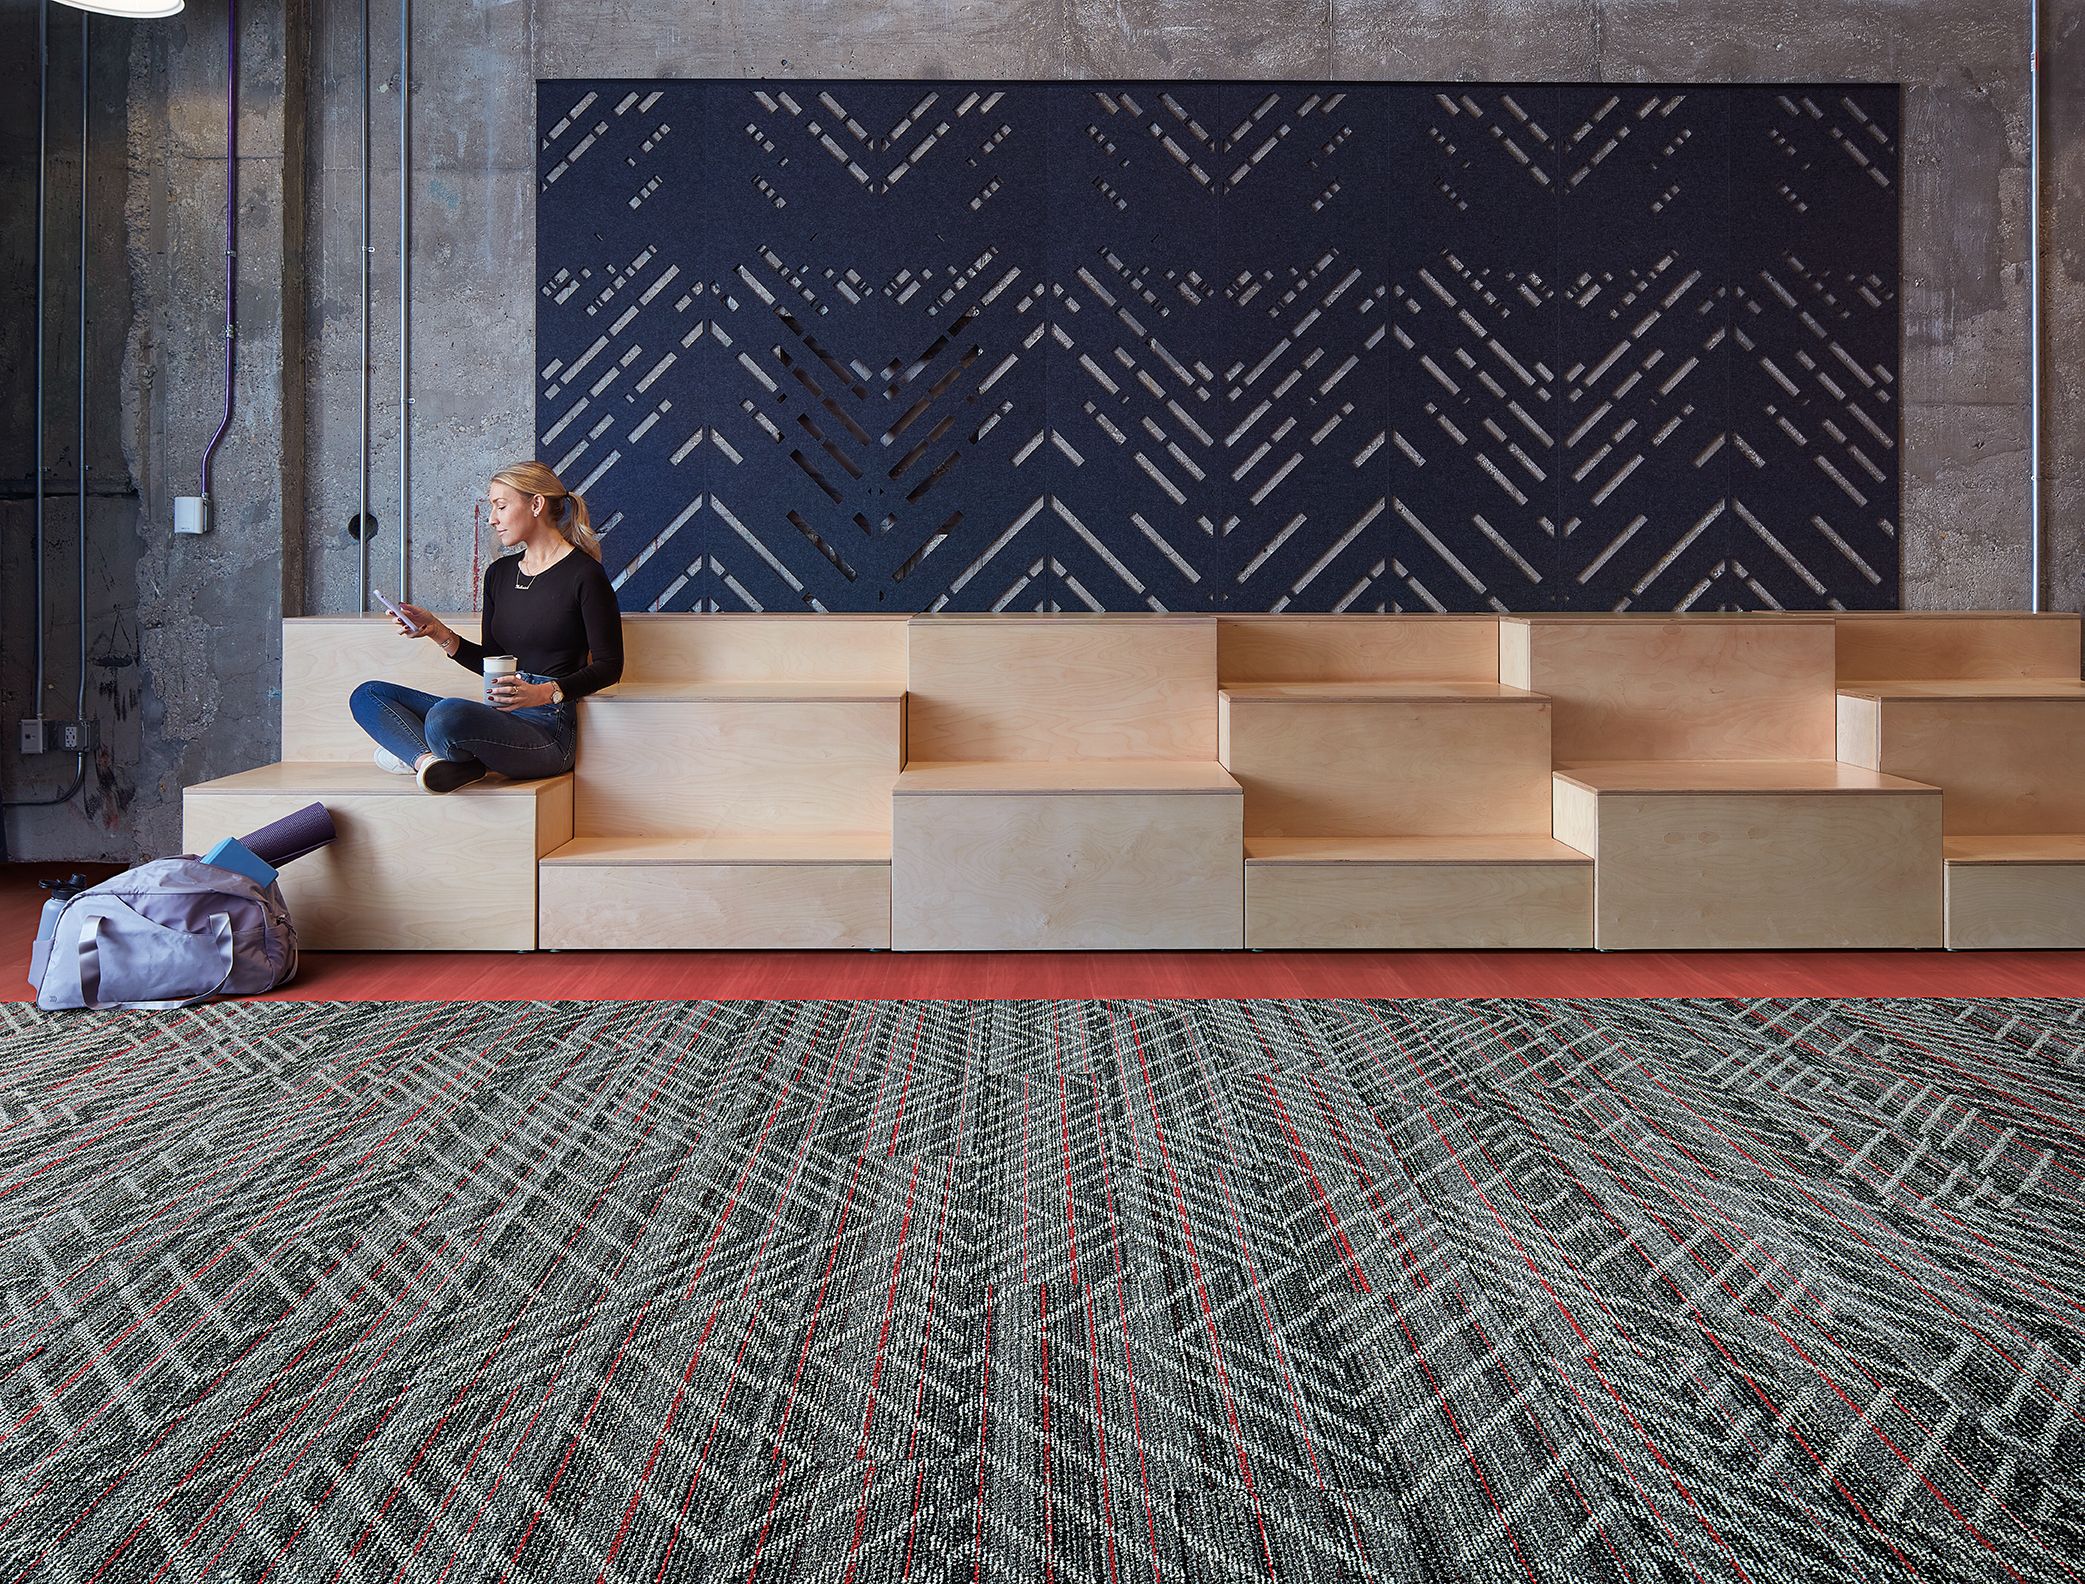 Interface Reflectors plank carpet tile with Studio Set LVT in open area with woman seated on wood risers image number 6